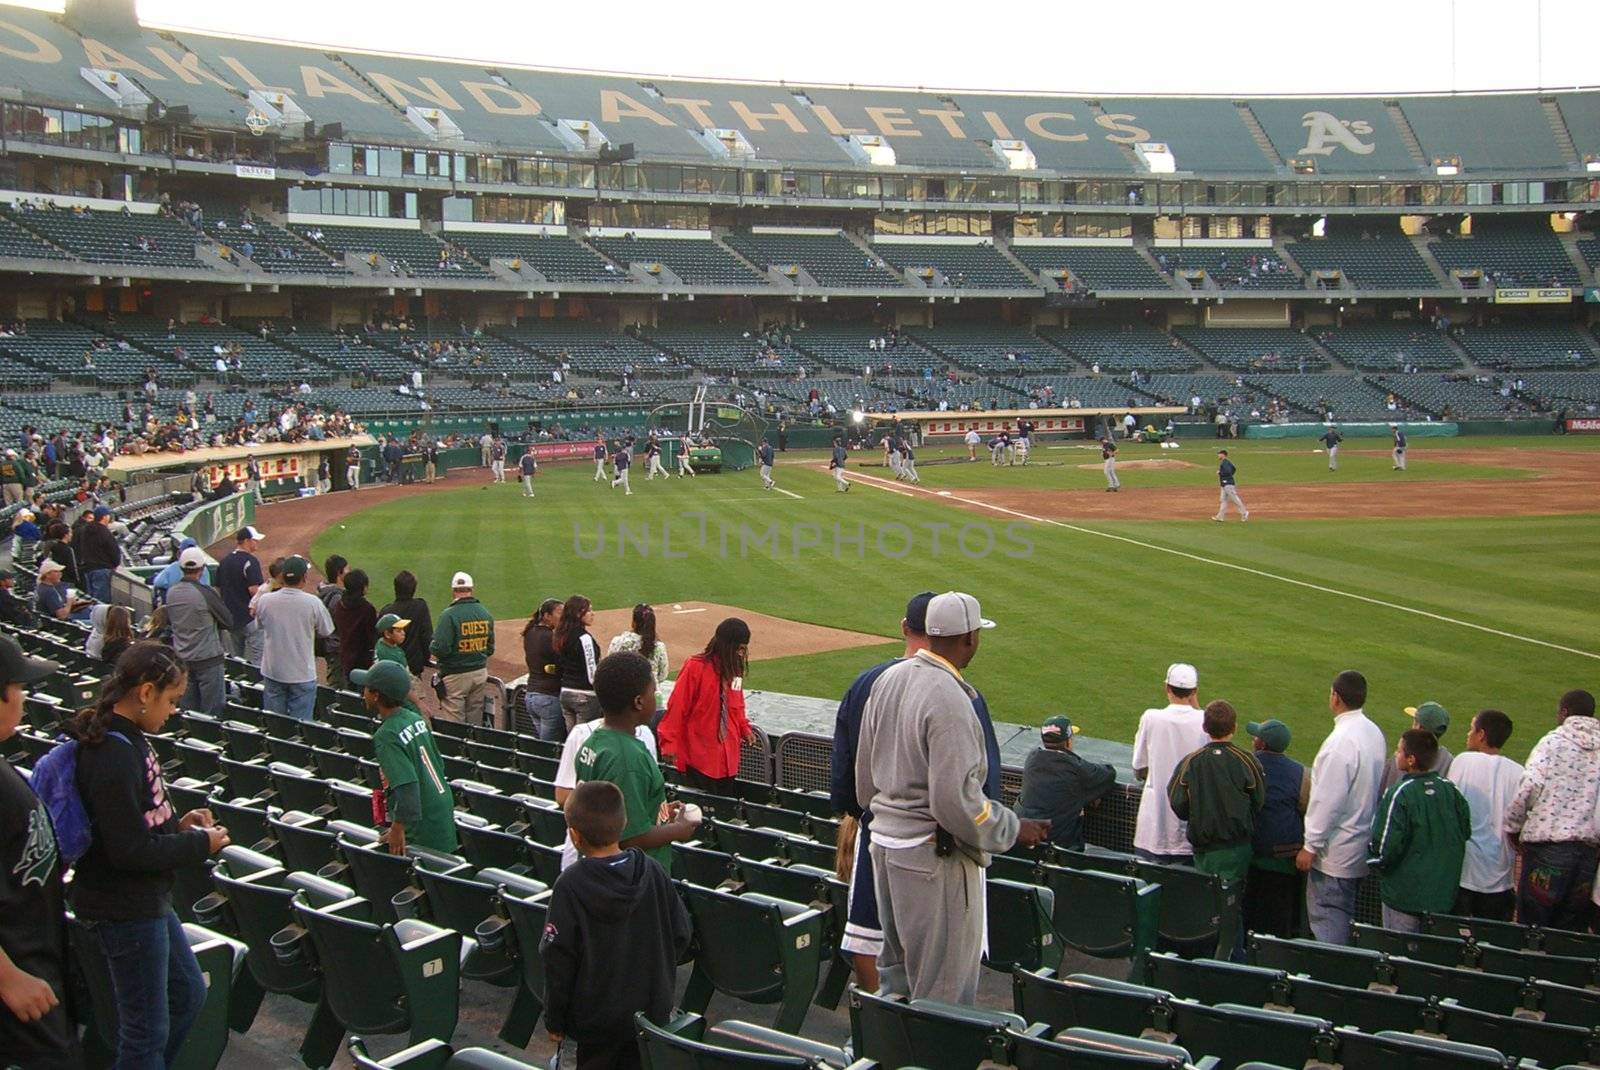 Athletics fans gather to watch batting practice for a late season baseball game